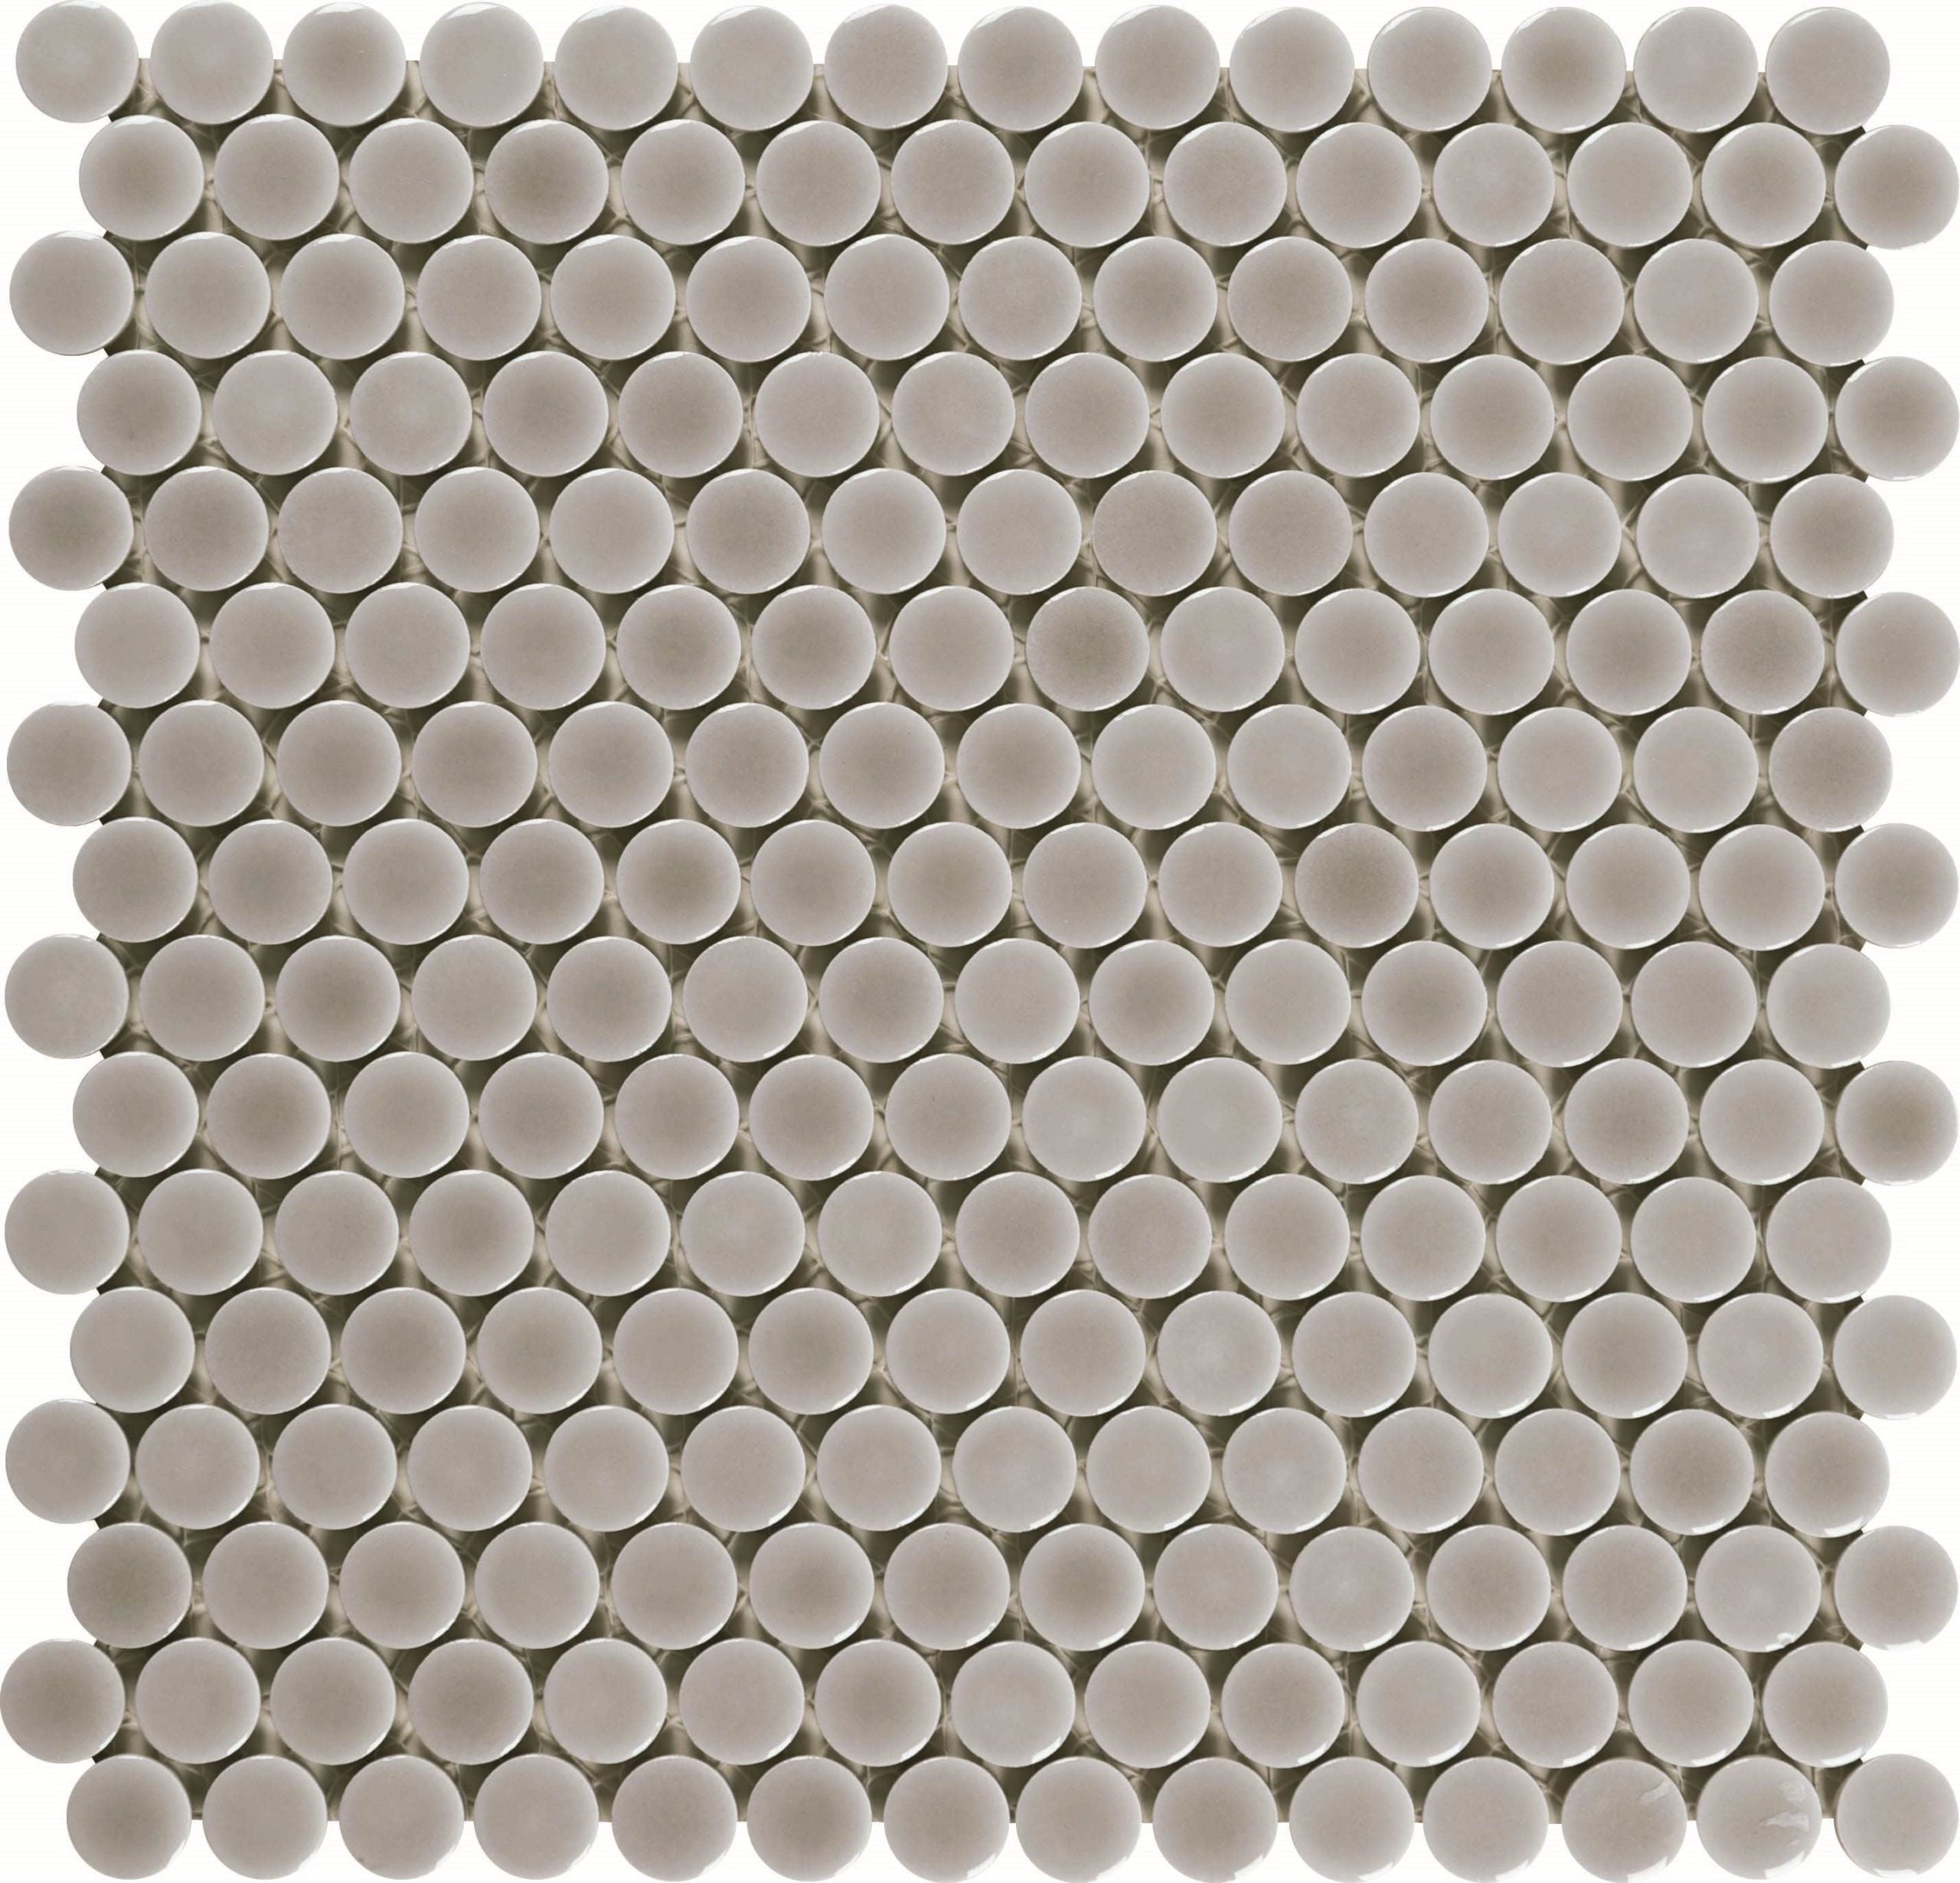 Mosaic Taupe 1-Inch Penny Rounds Pattern (12"x12")